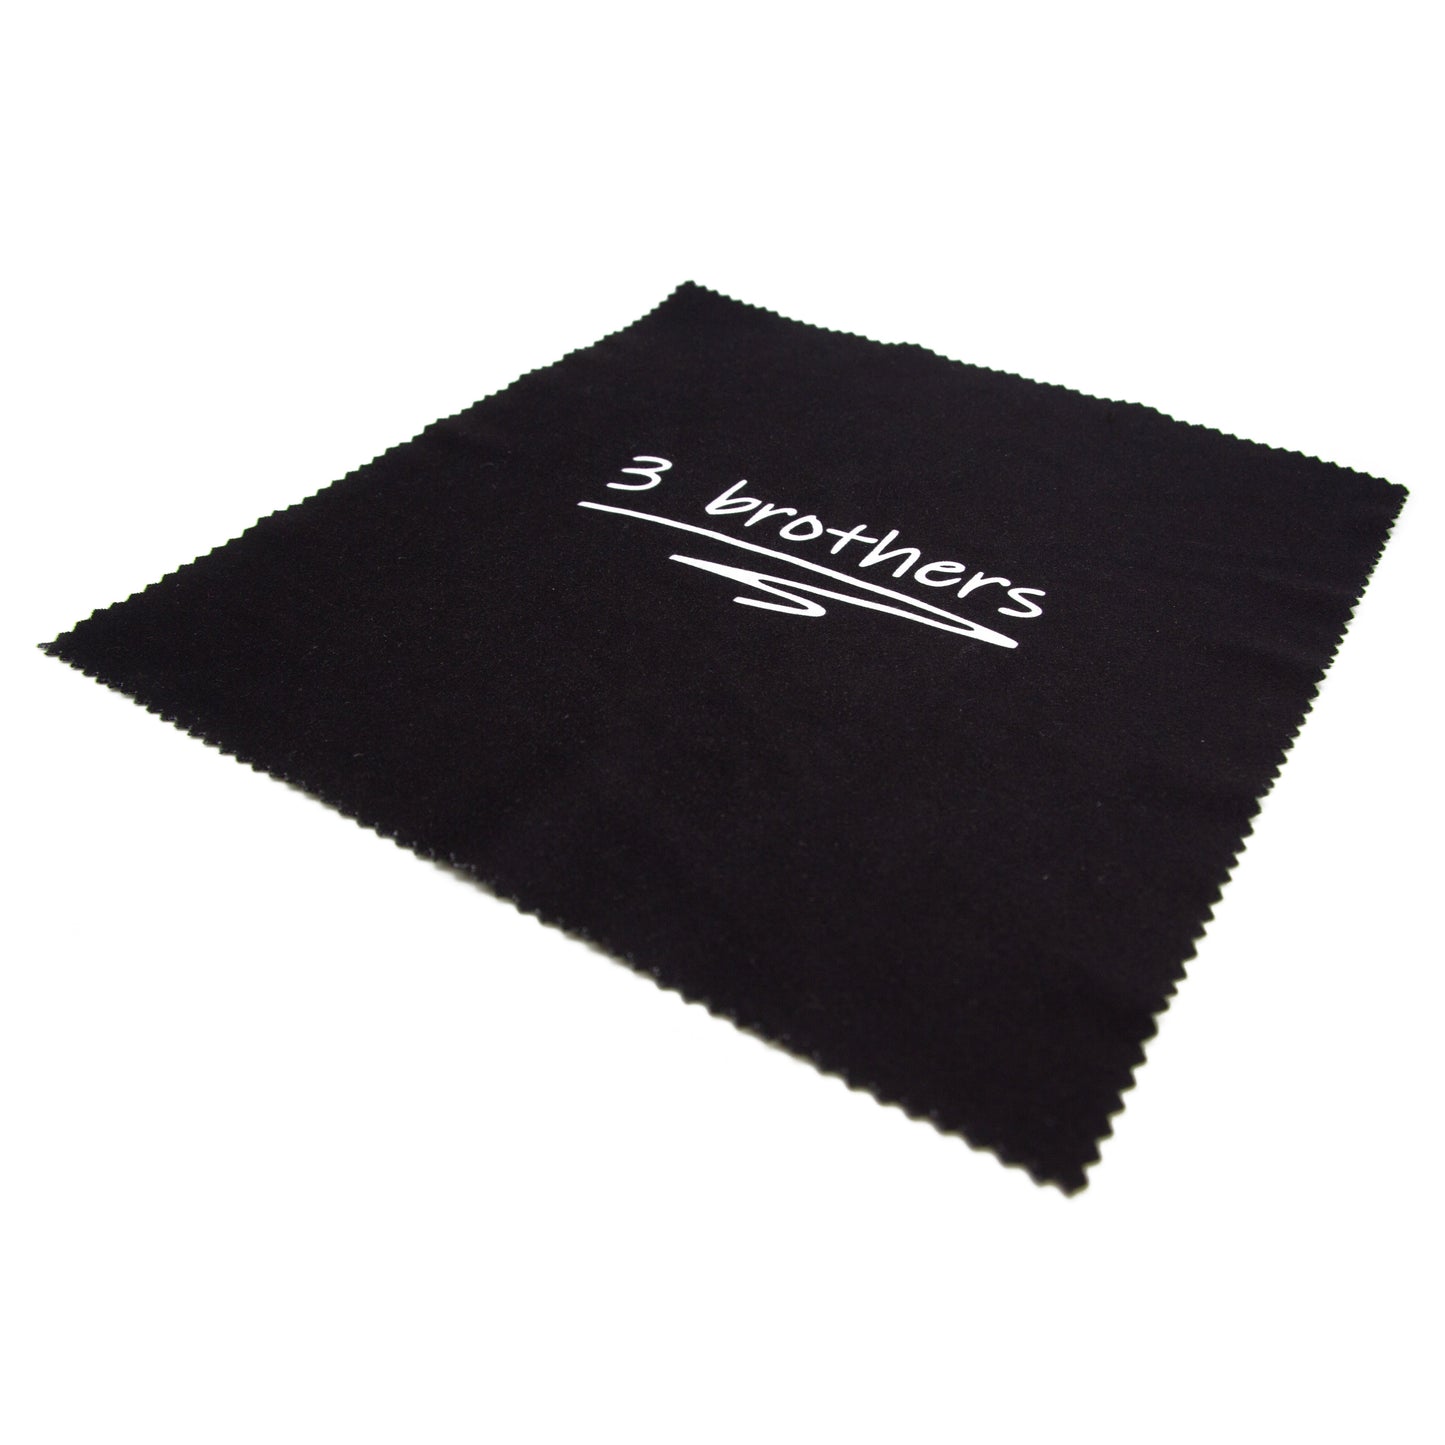  3 brothers - Cleaning Cloth - Glasses Cloth